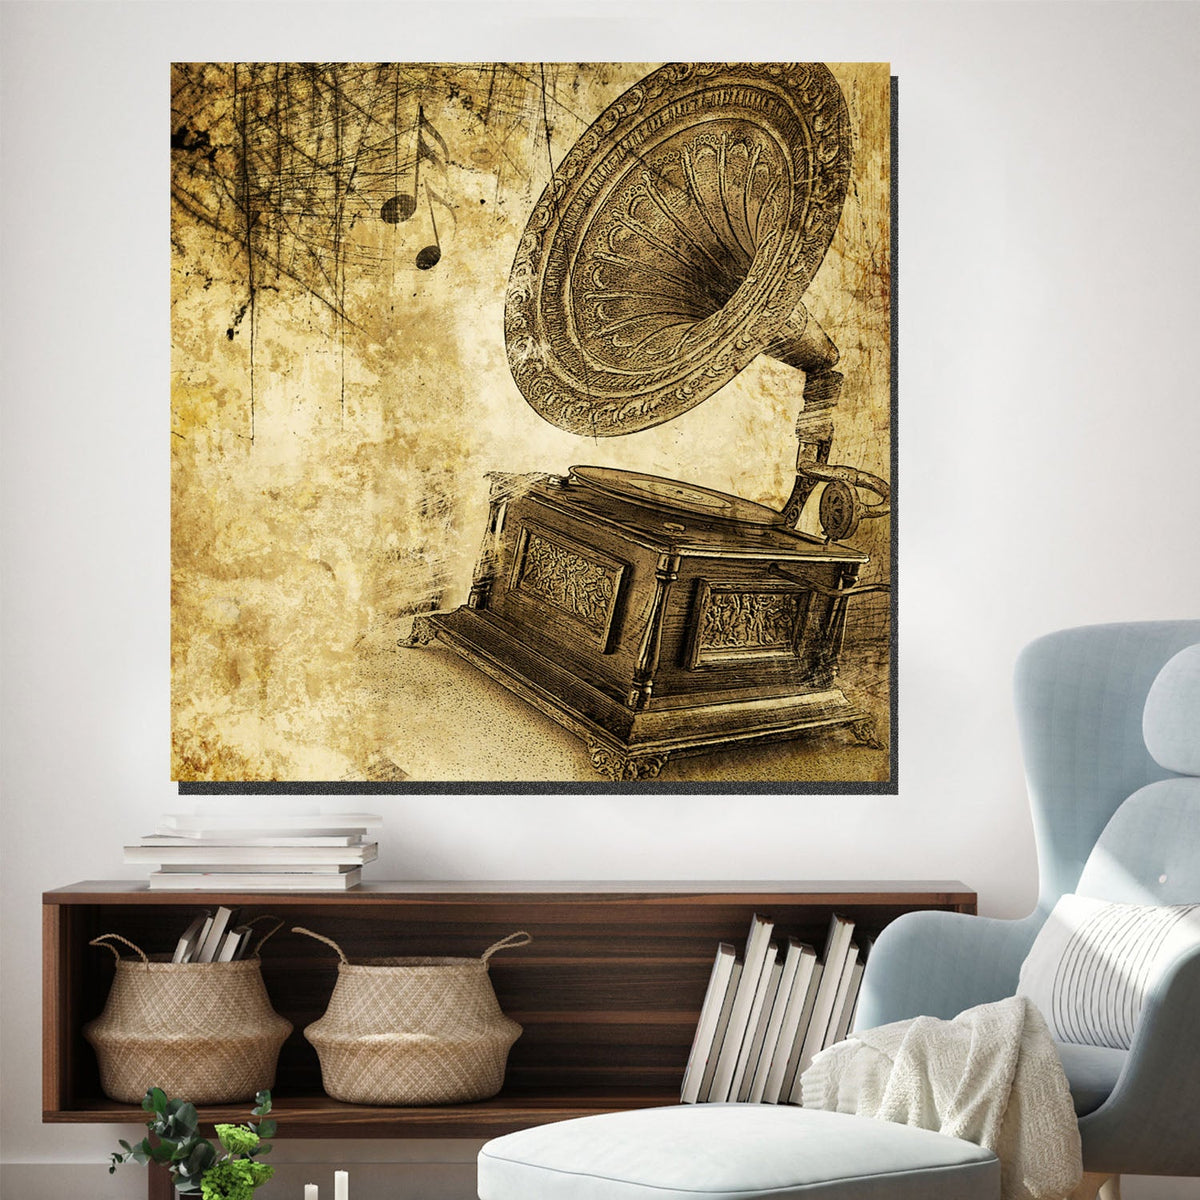 https://cdn.shopify.com/s/files/1/0387/9986/8044/products/GramophoneMusicalNoteCanvasArtprintStretched-2.jpg